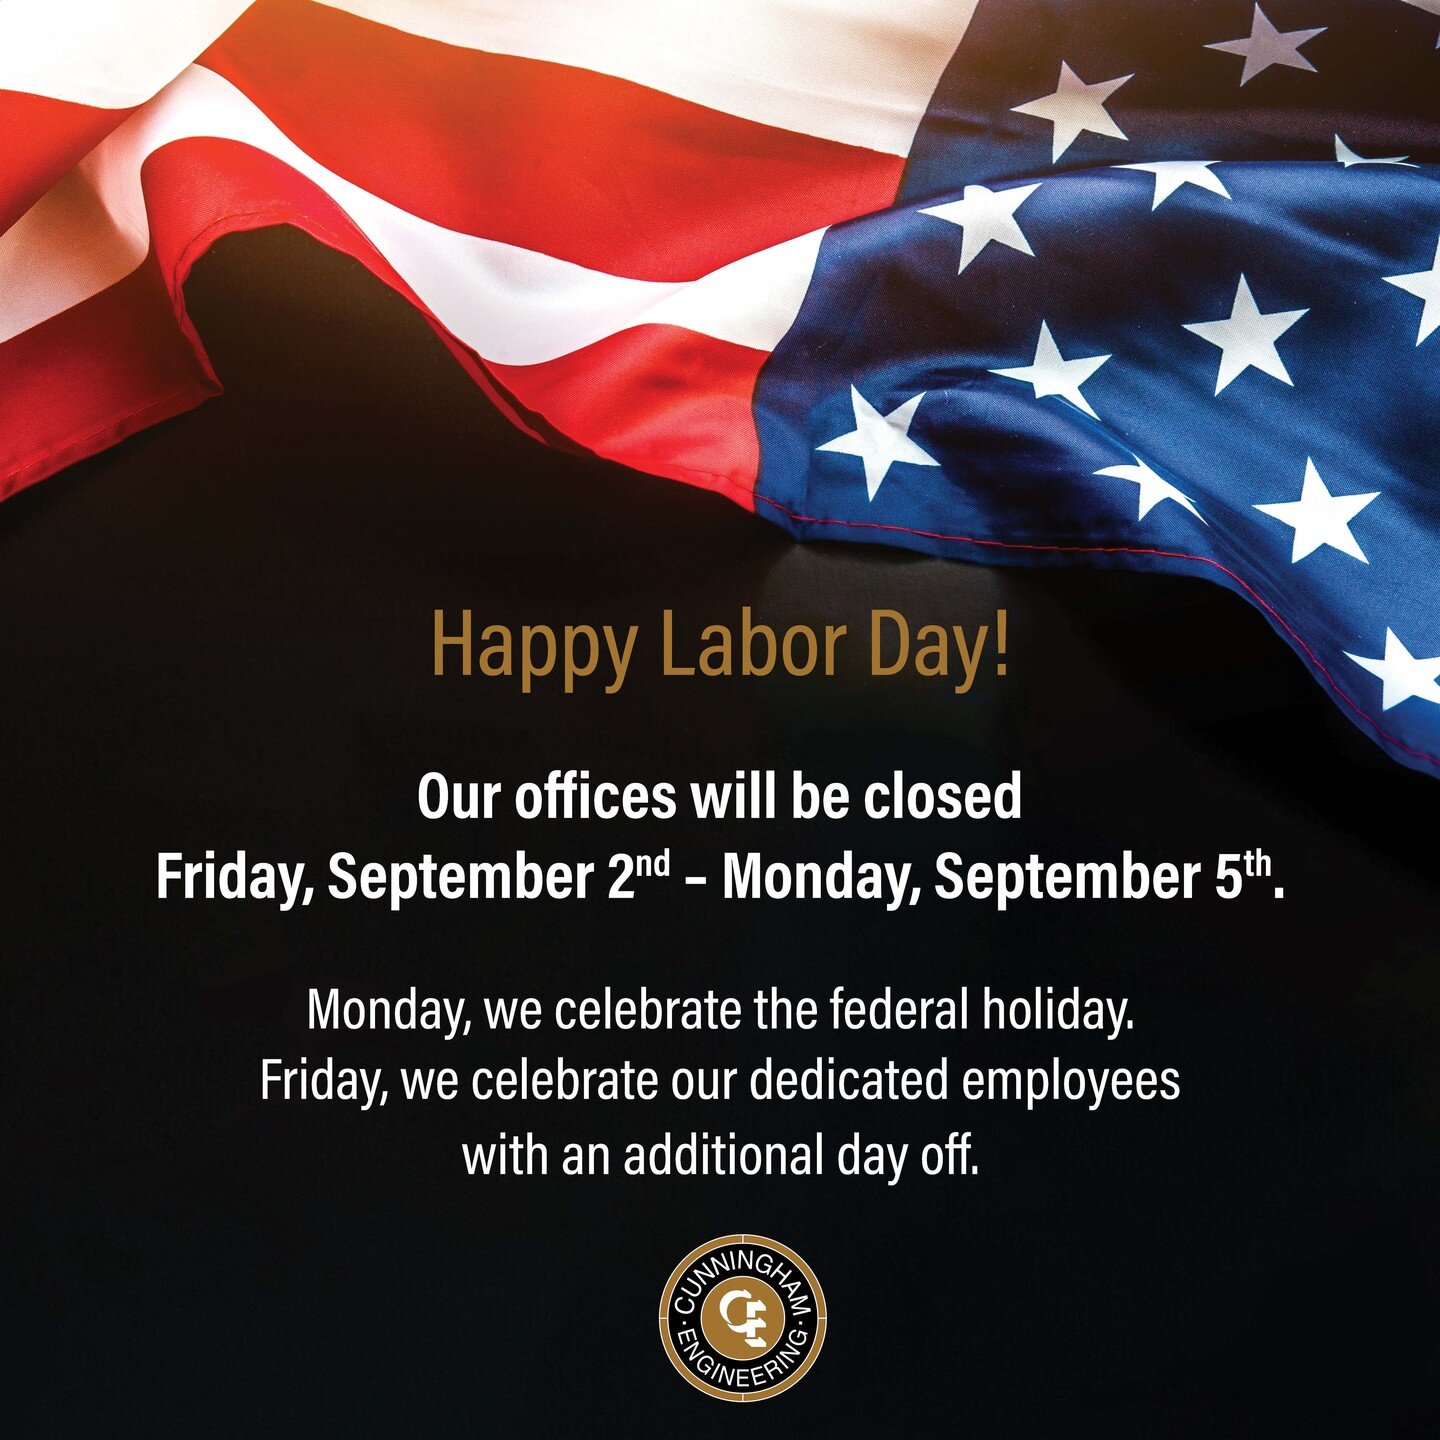 Happy Labor Day from Cunningham Engineering. Monday, we celebrate the federal holiday. Friday, we celebrate our dedicated employees with an additional day off. #laborday2022 #employeeperks